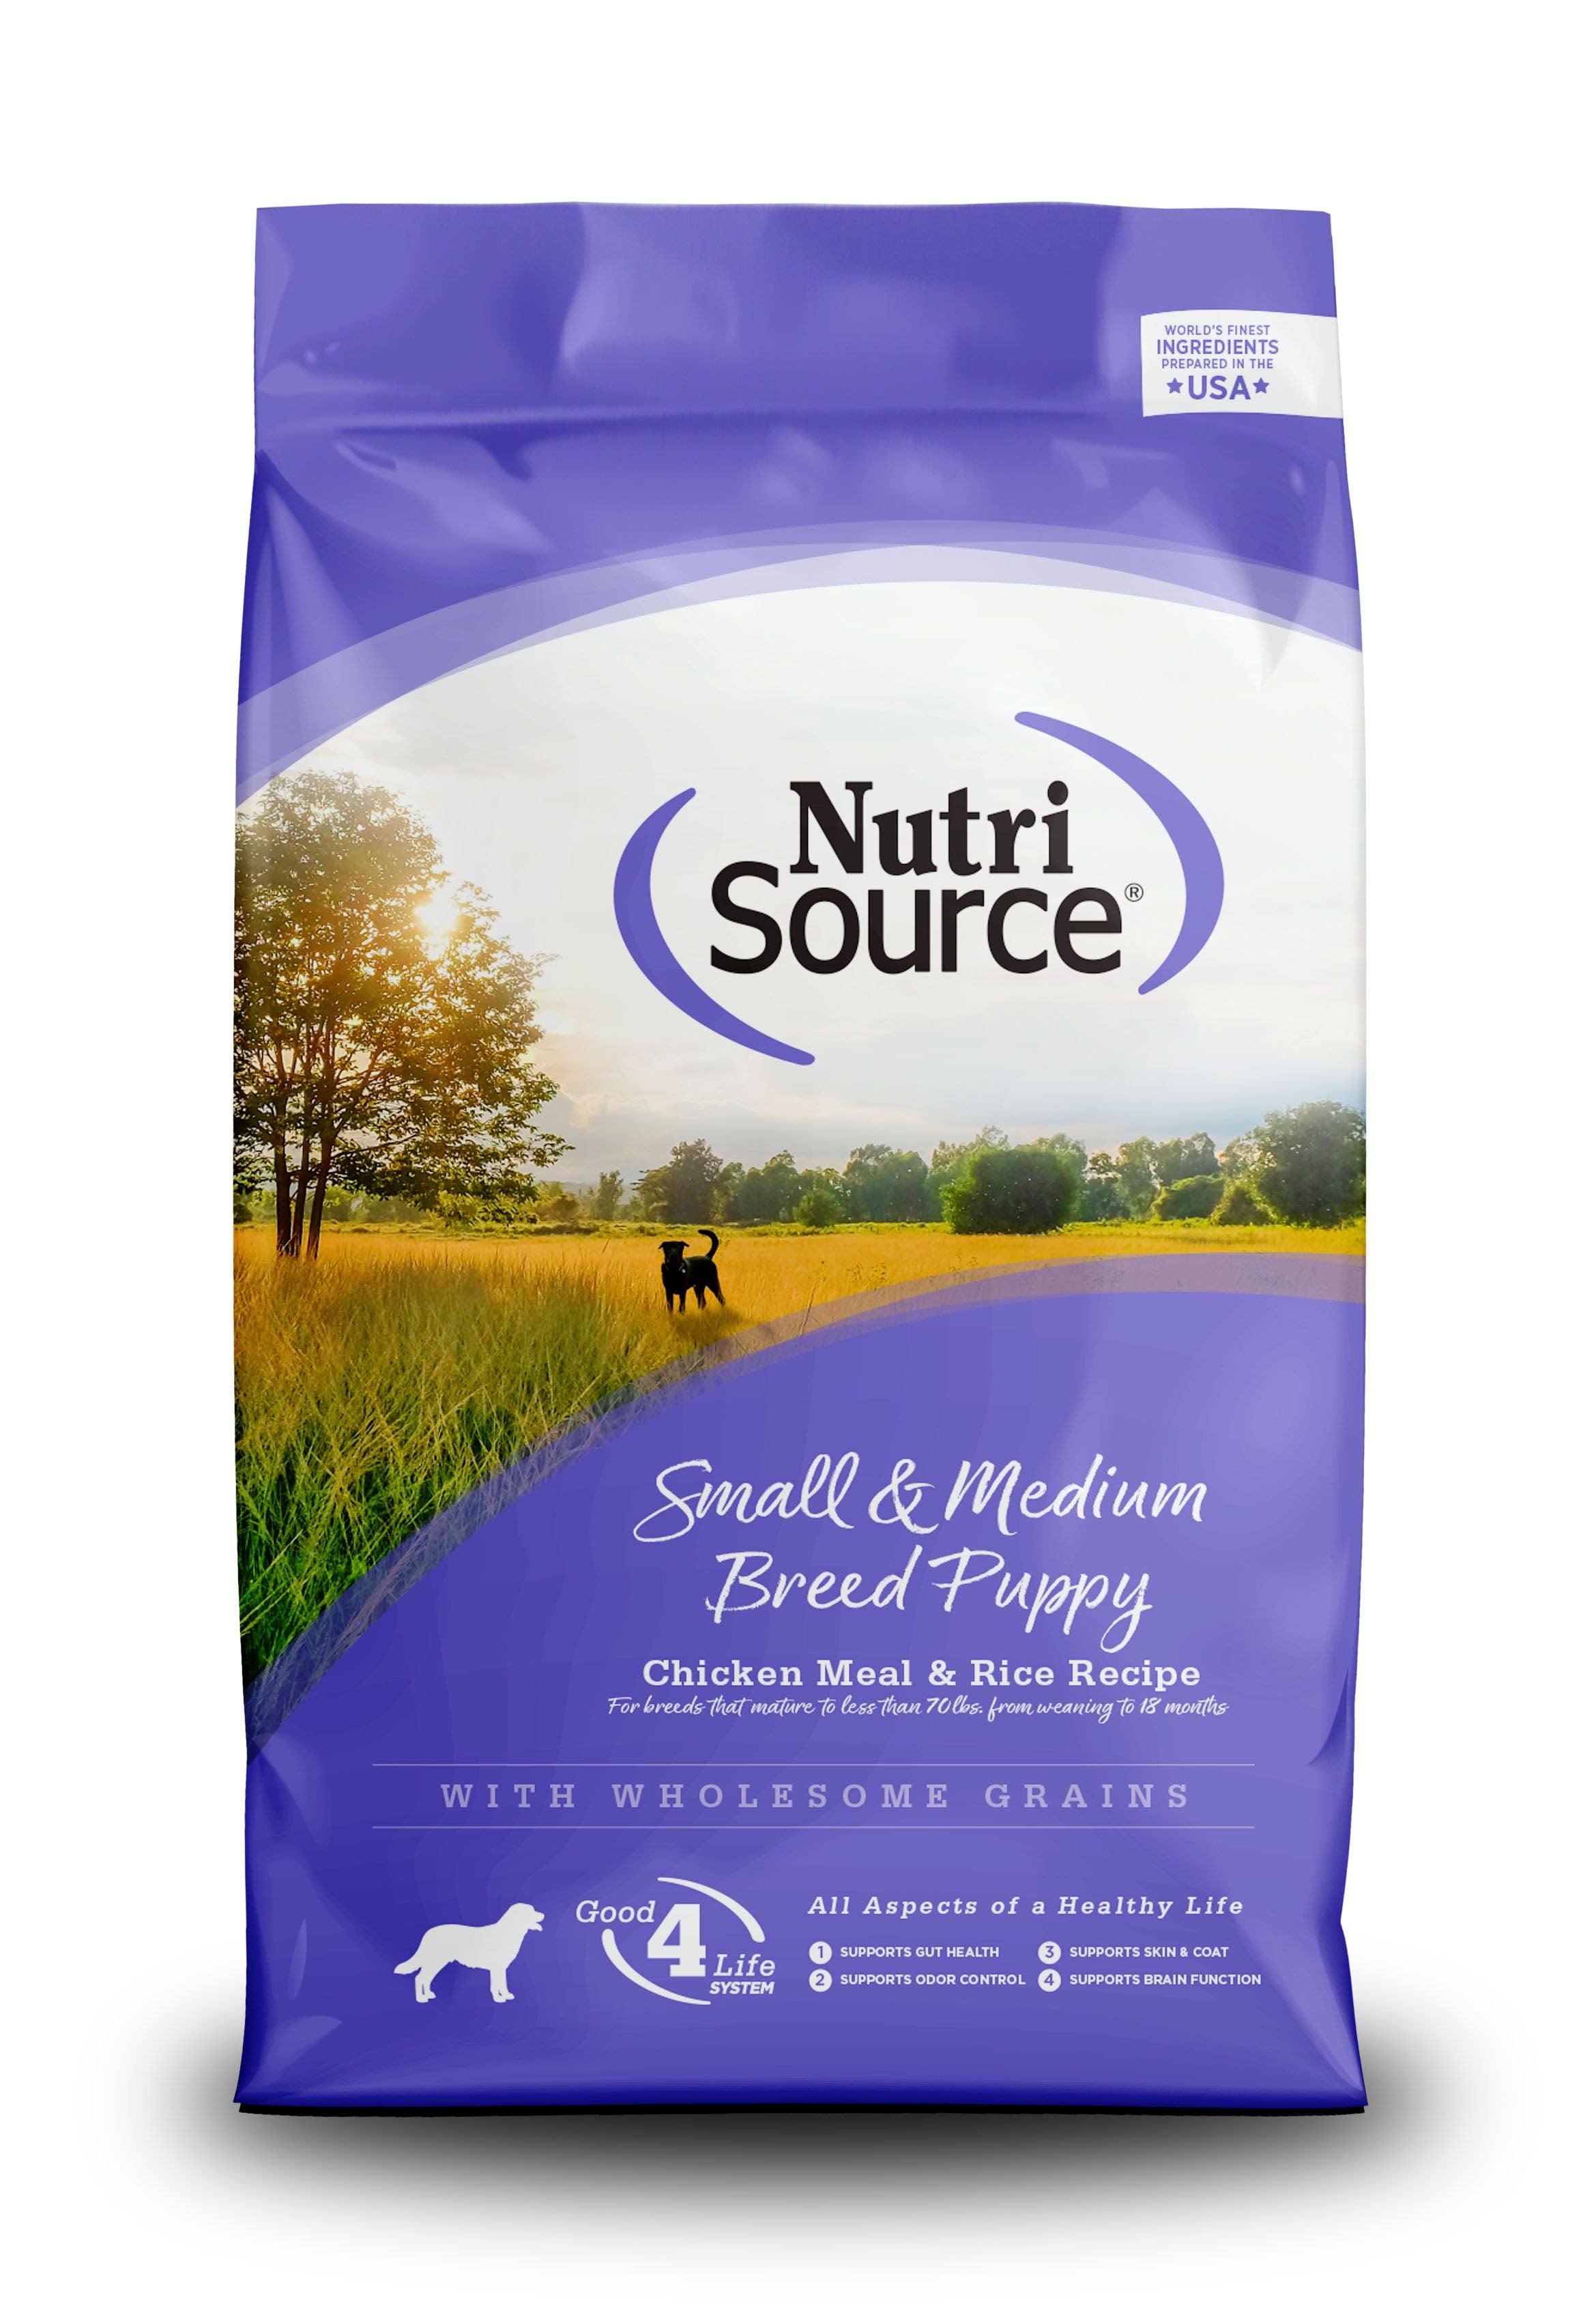 NutriSource Chicken & Rice Small/Medium Breed Puppy Dry Dog Food 15lb